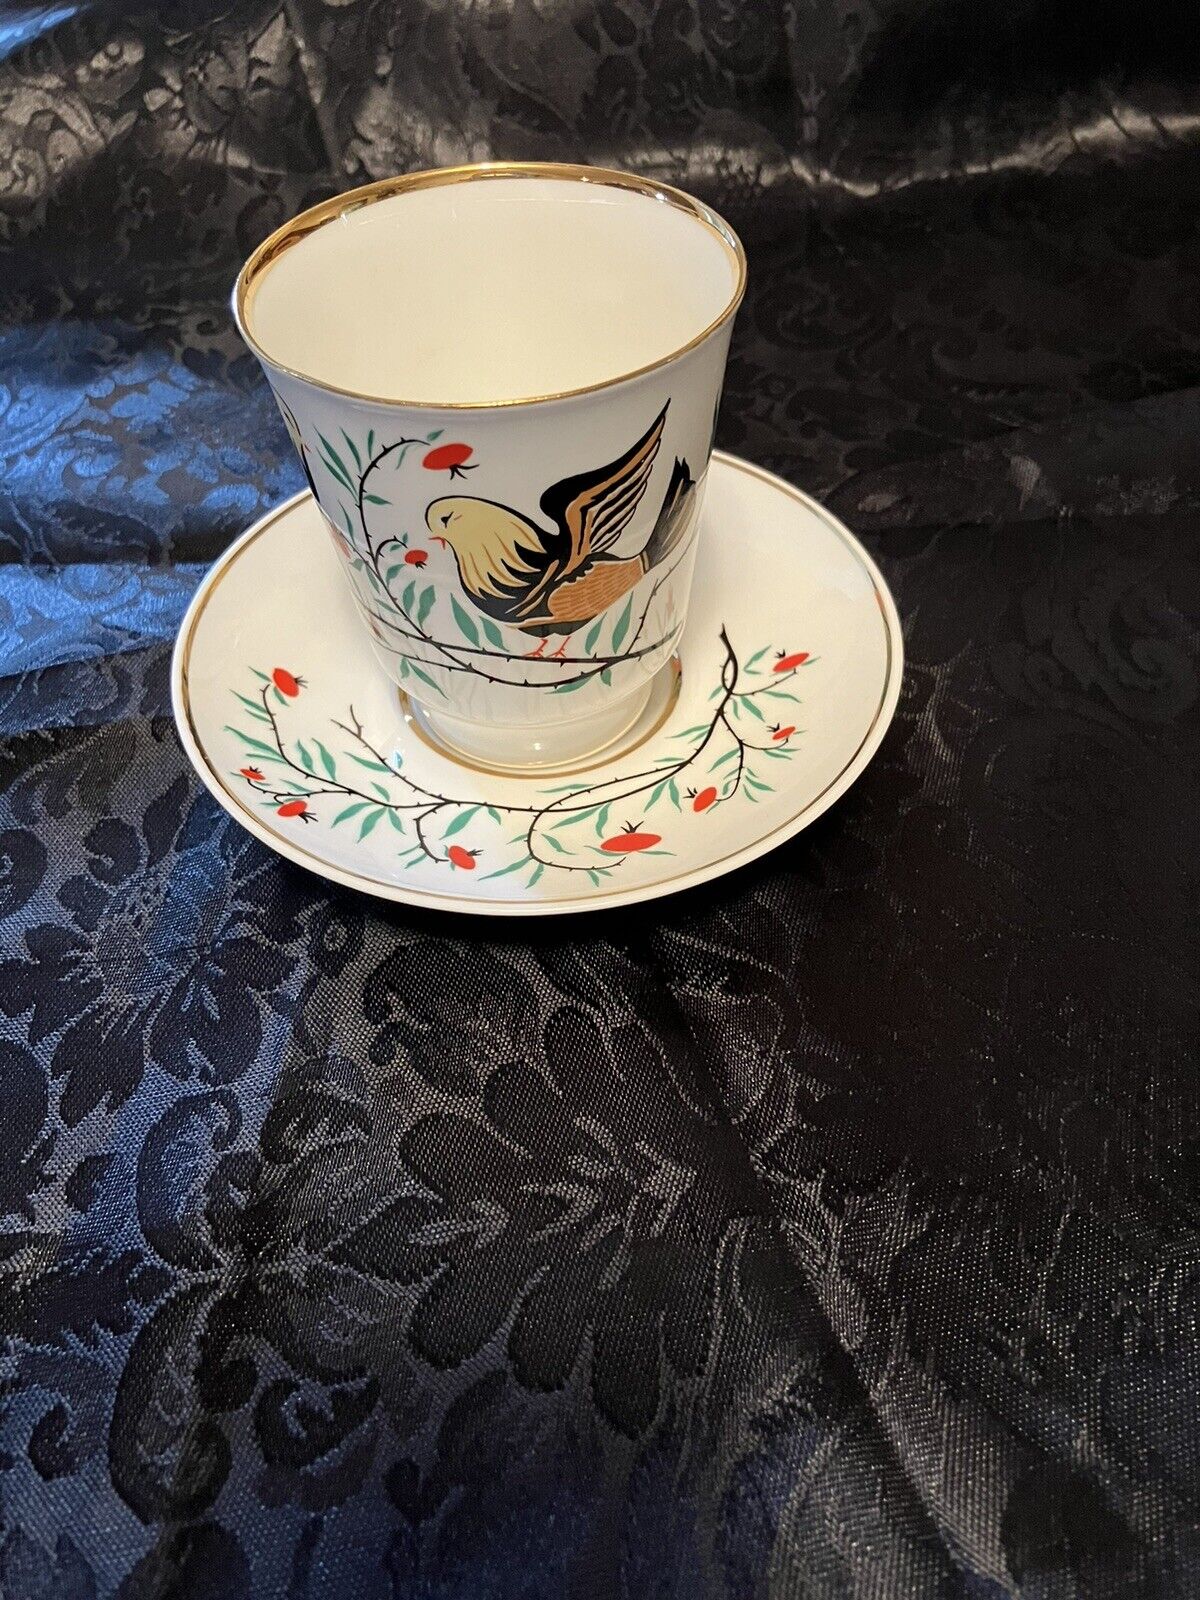 Lomolosov Tea Cup Made in the USSR Dainty Size w/birds SHIPS SAME DAY